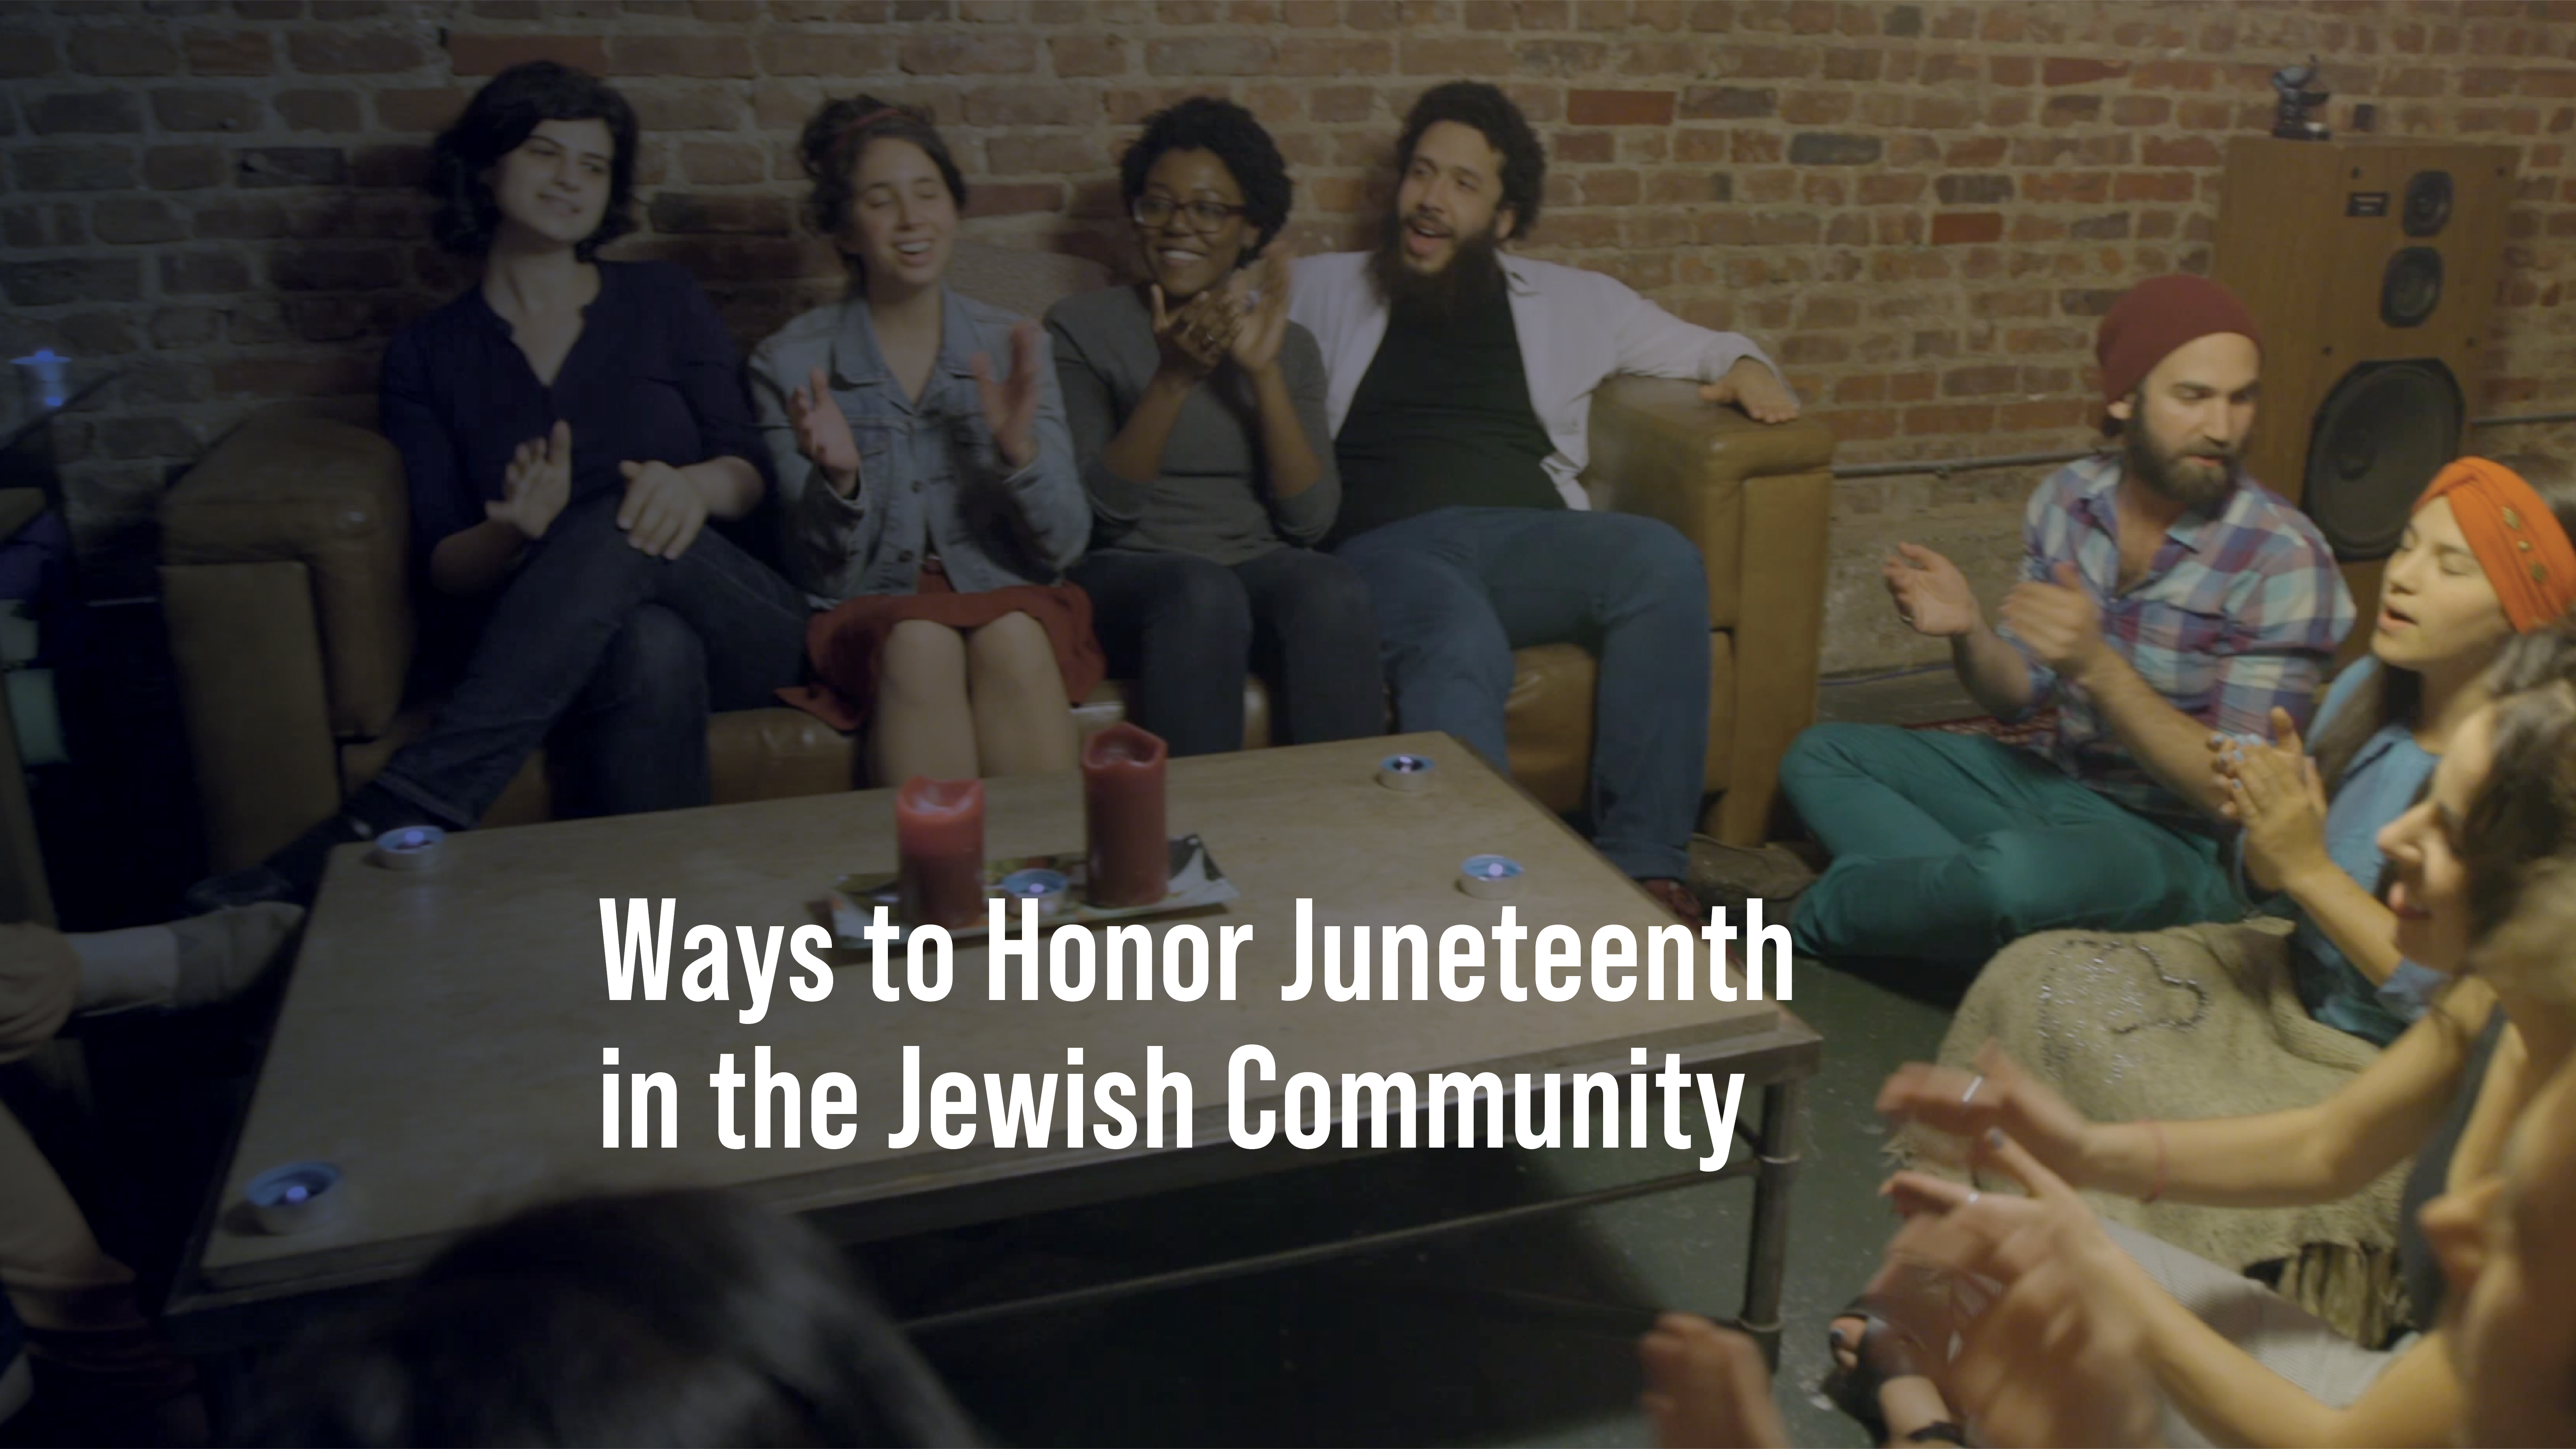 Ways to Honor Juneteenth in the Jewish Community